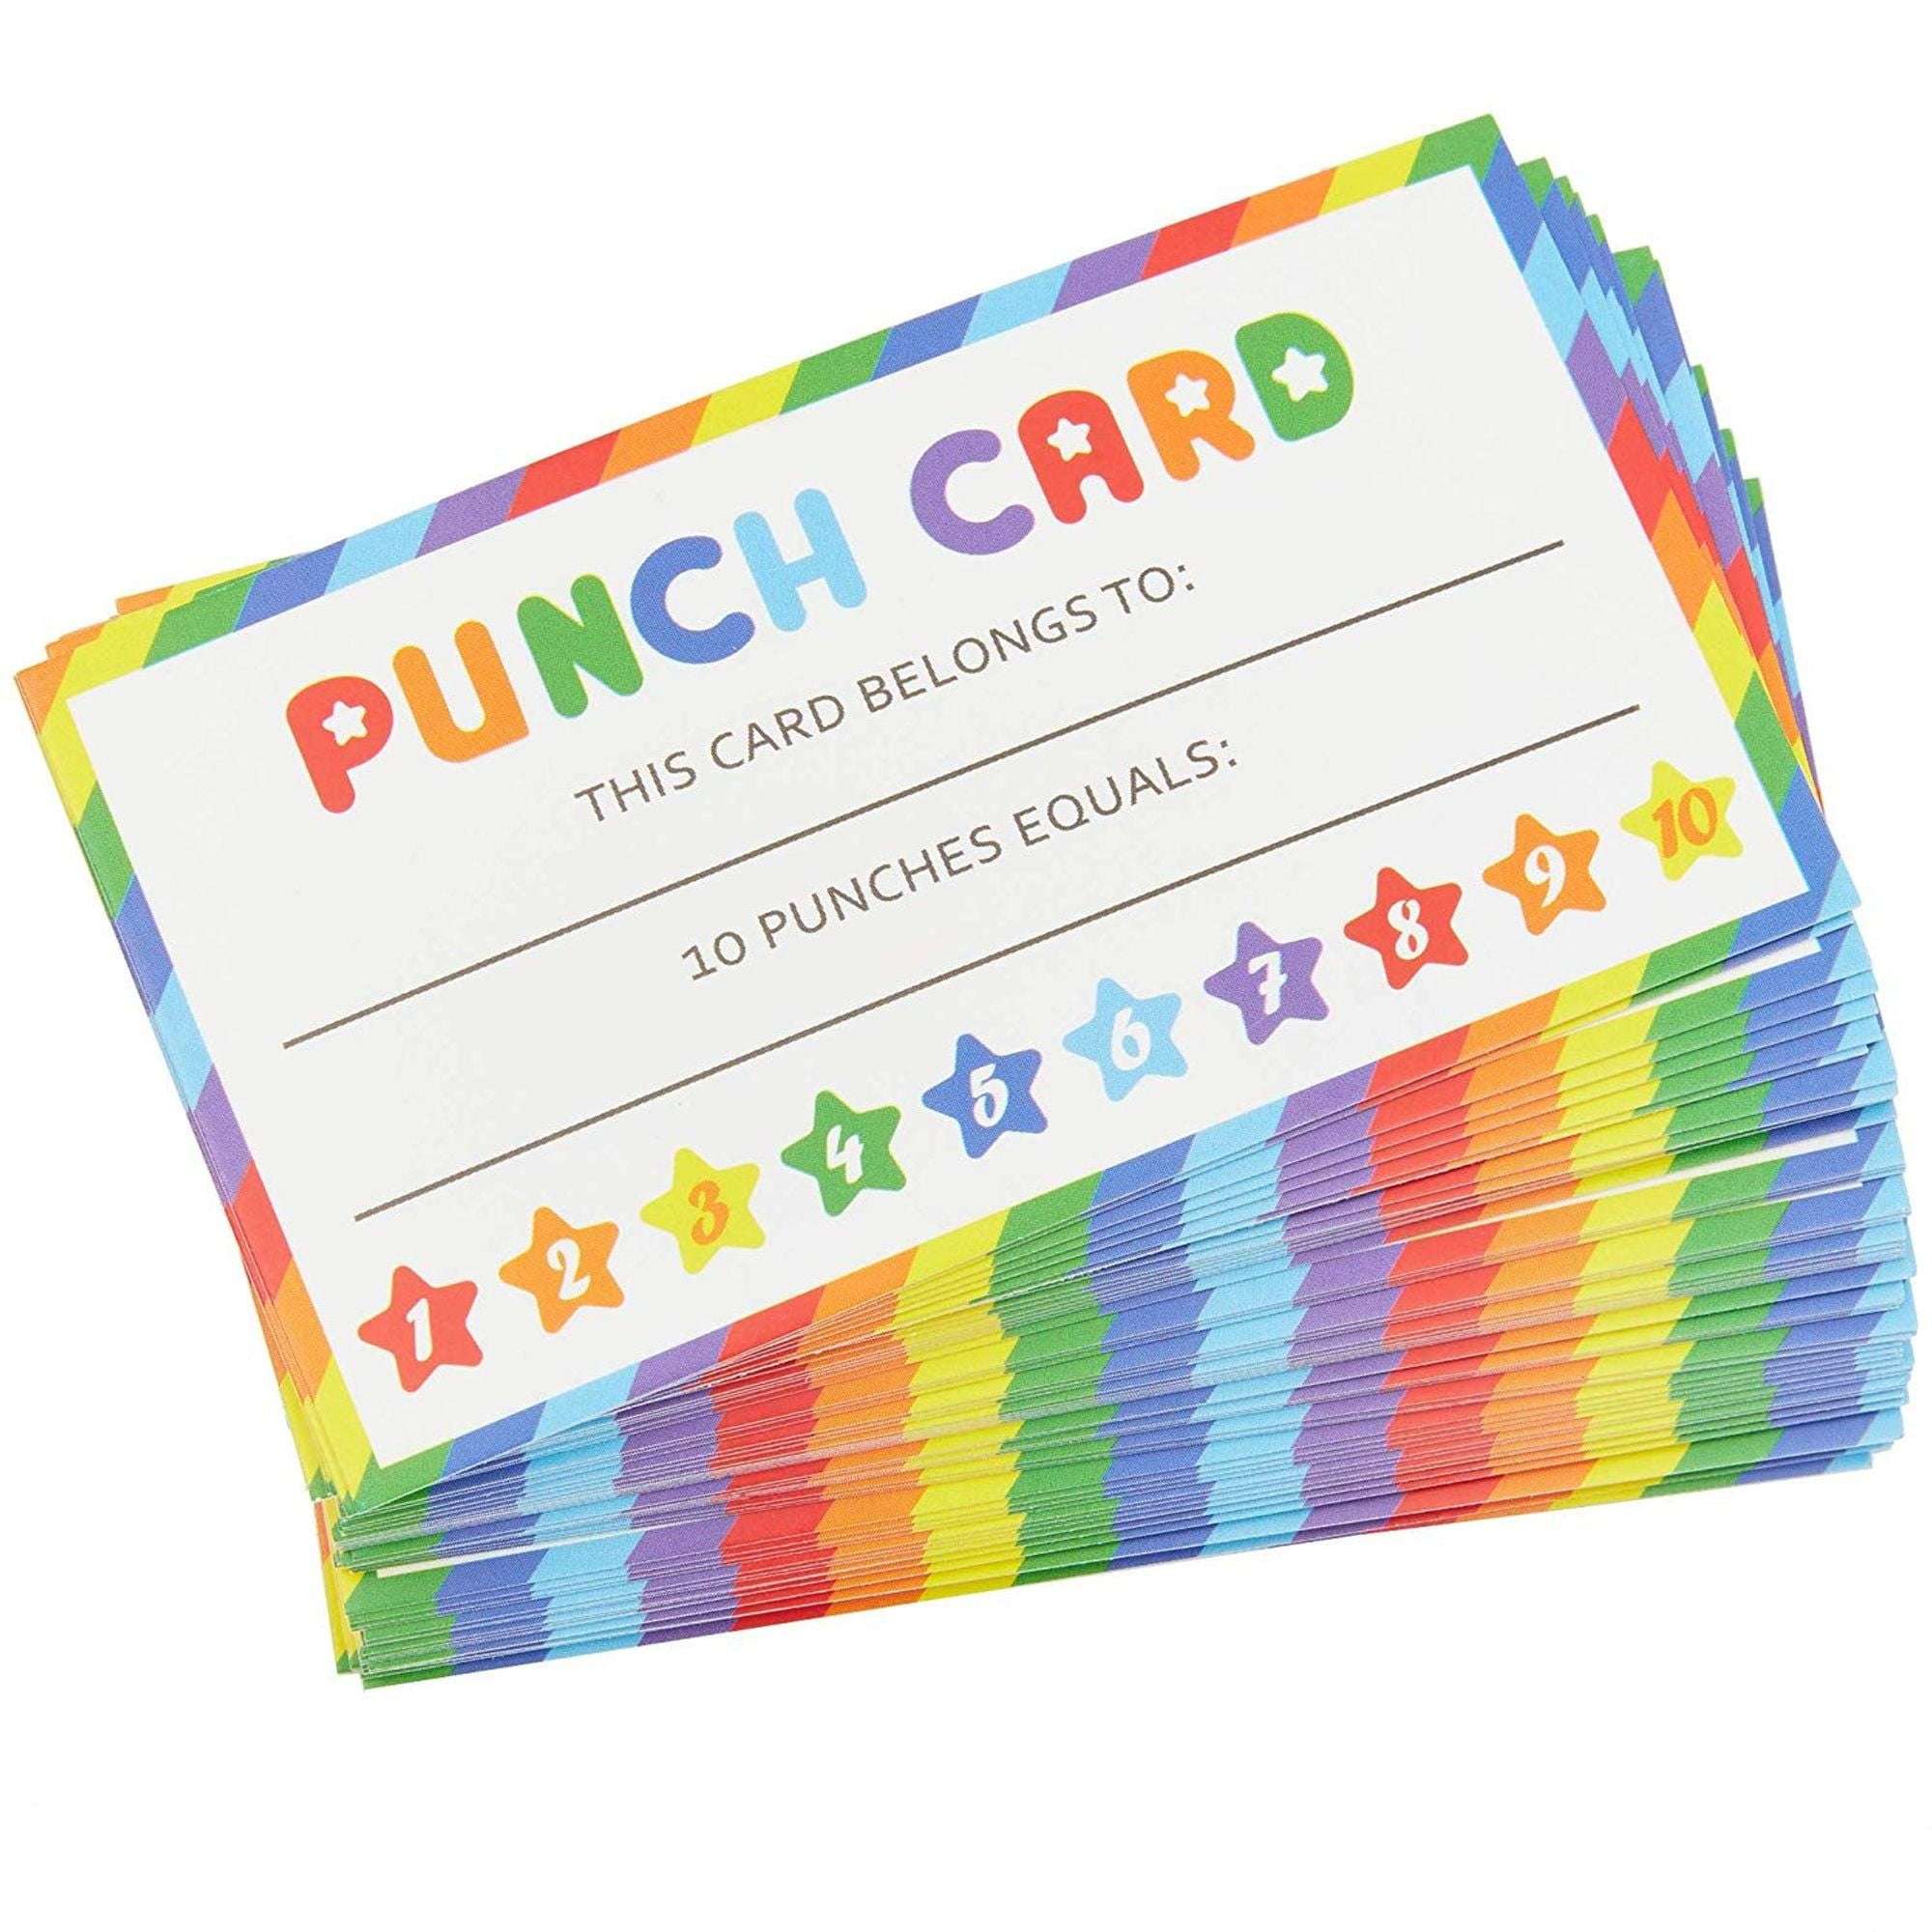 Teaching Materials Teacher Supplies For Classroom 50 Punch Cards Incentive Loyalty Reward Cards